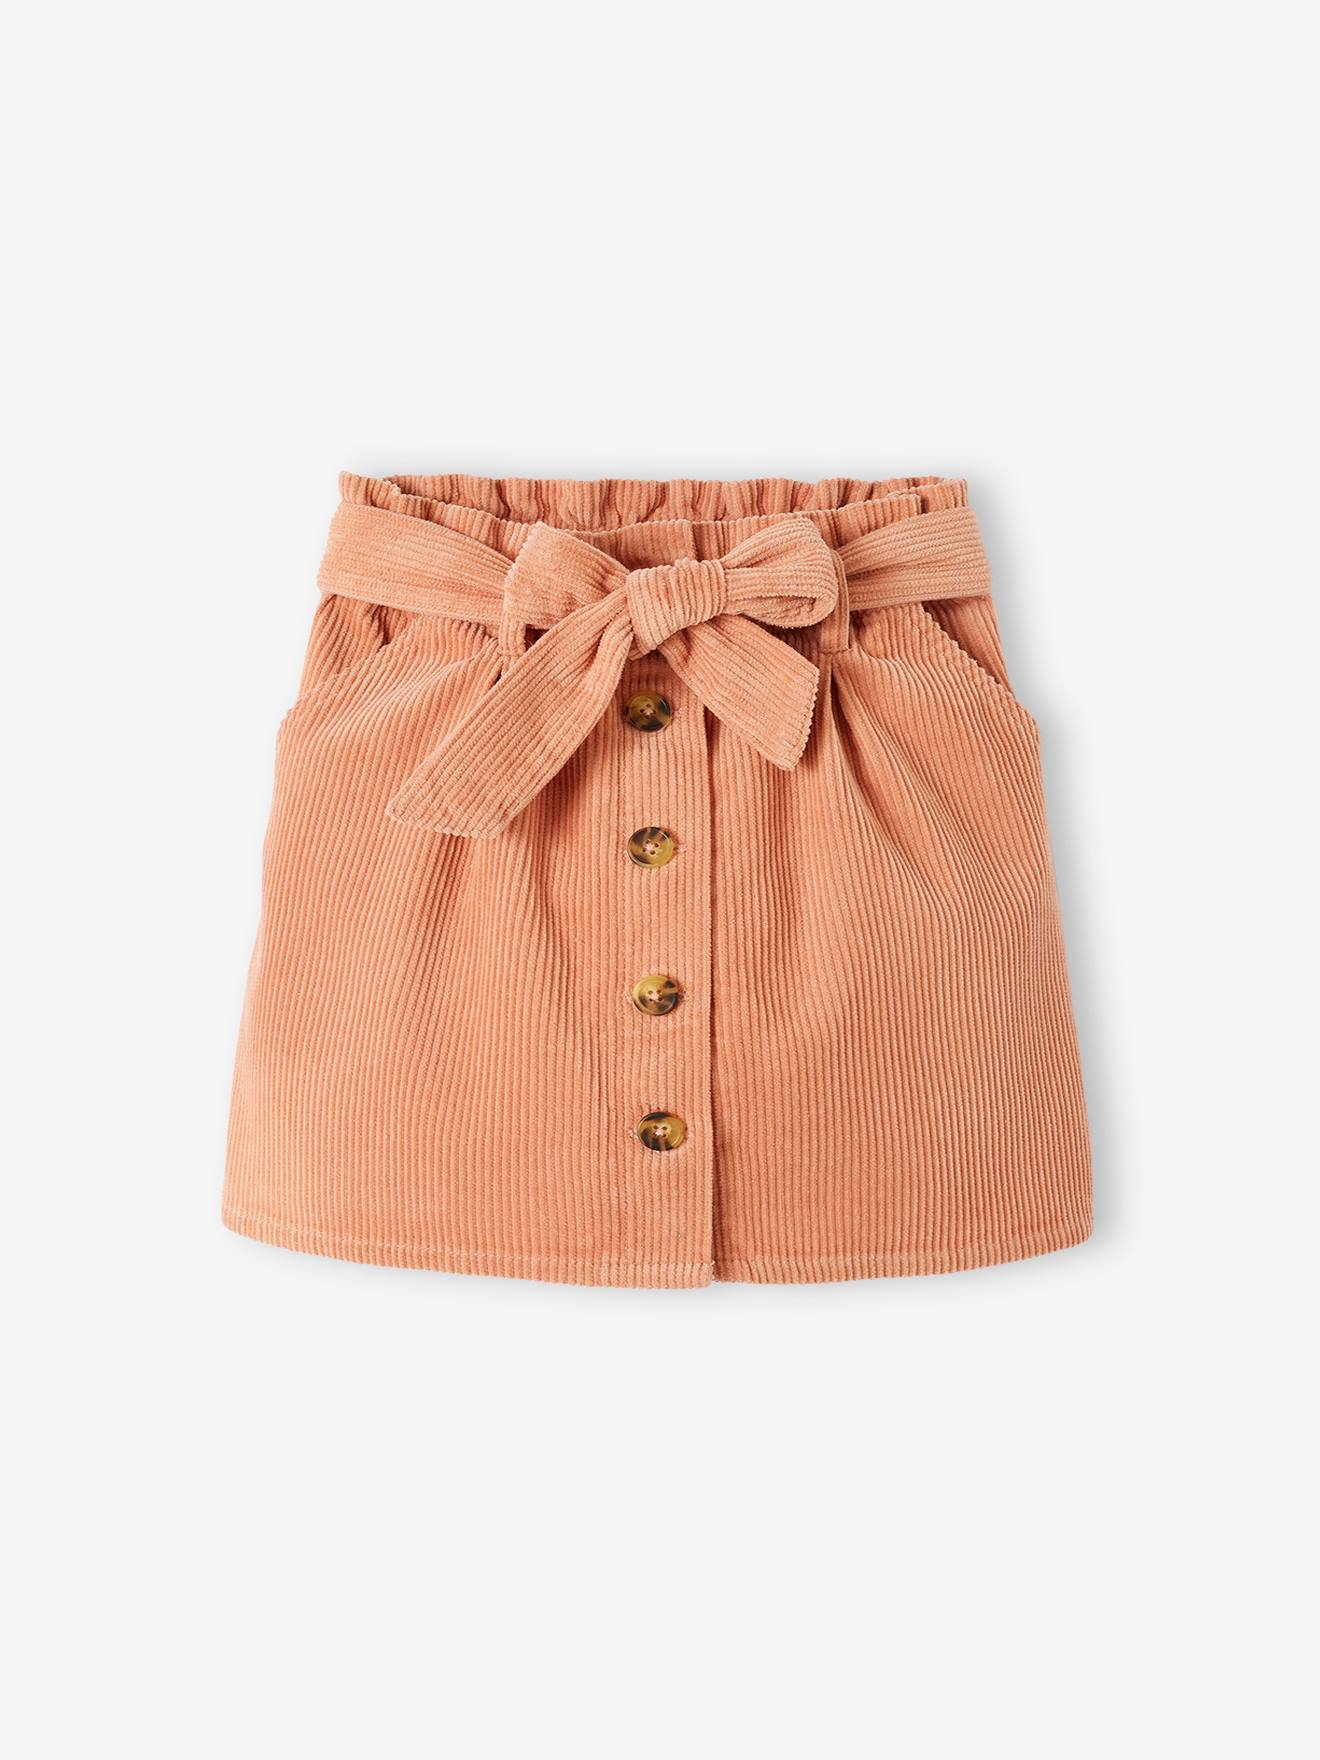 Paperbag Style Skirt in Corduroy for Girls peach